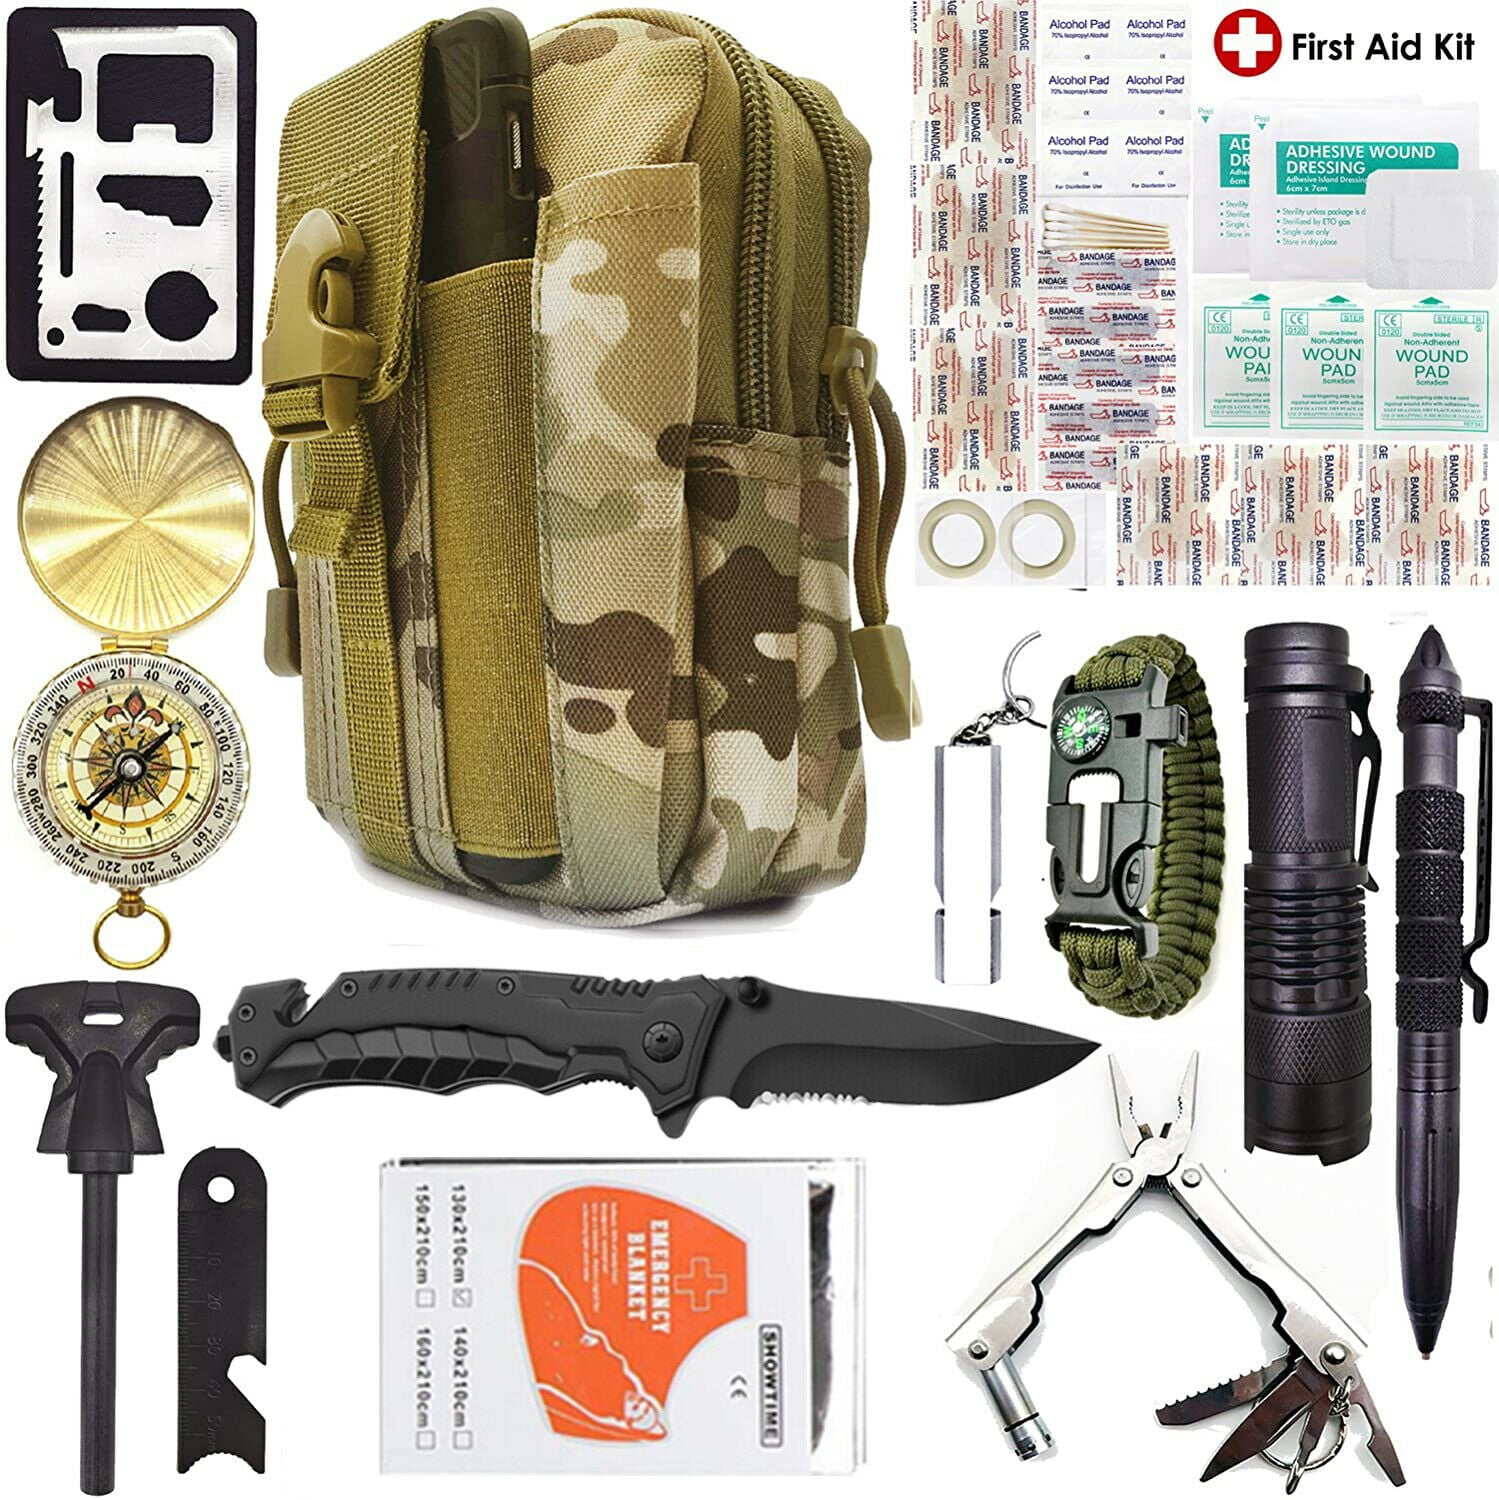 Molle Pouch Stop The Bleed Kit Military Style First Aid Kit ASATechmed 20 PC U.S Military Style Surplus Emergency Survival Kit